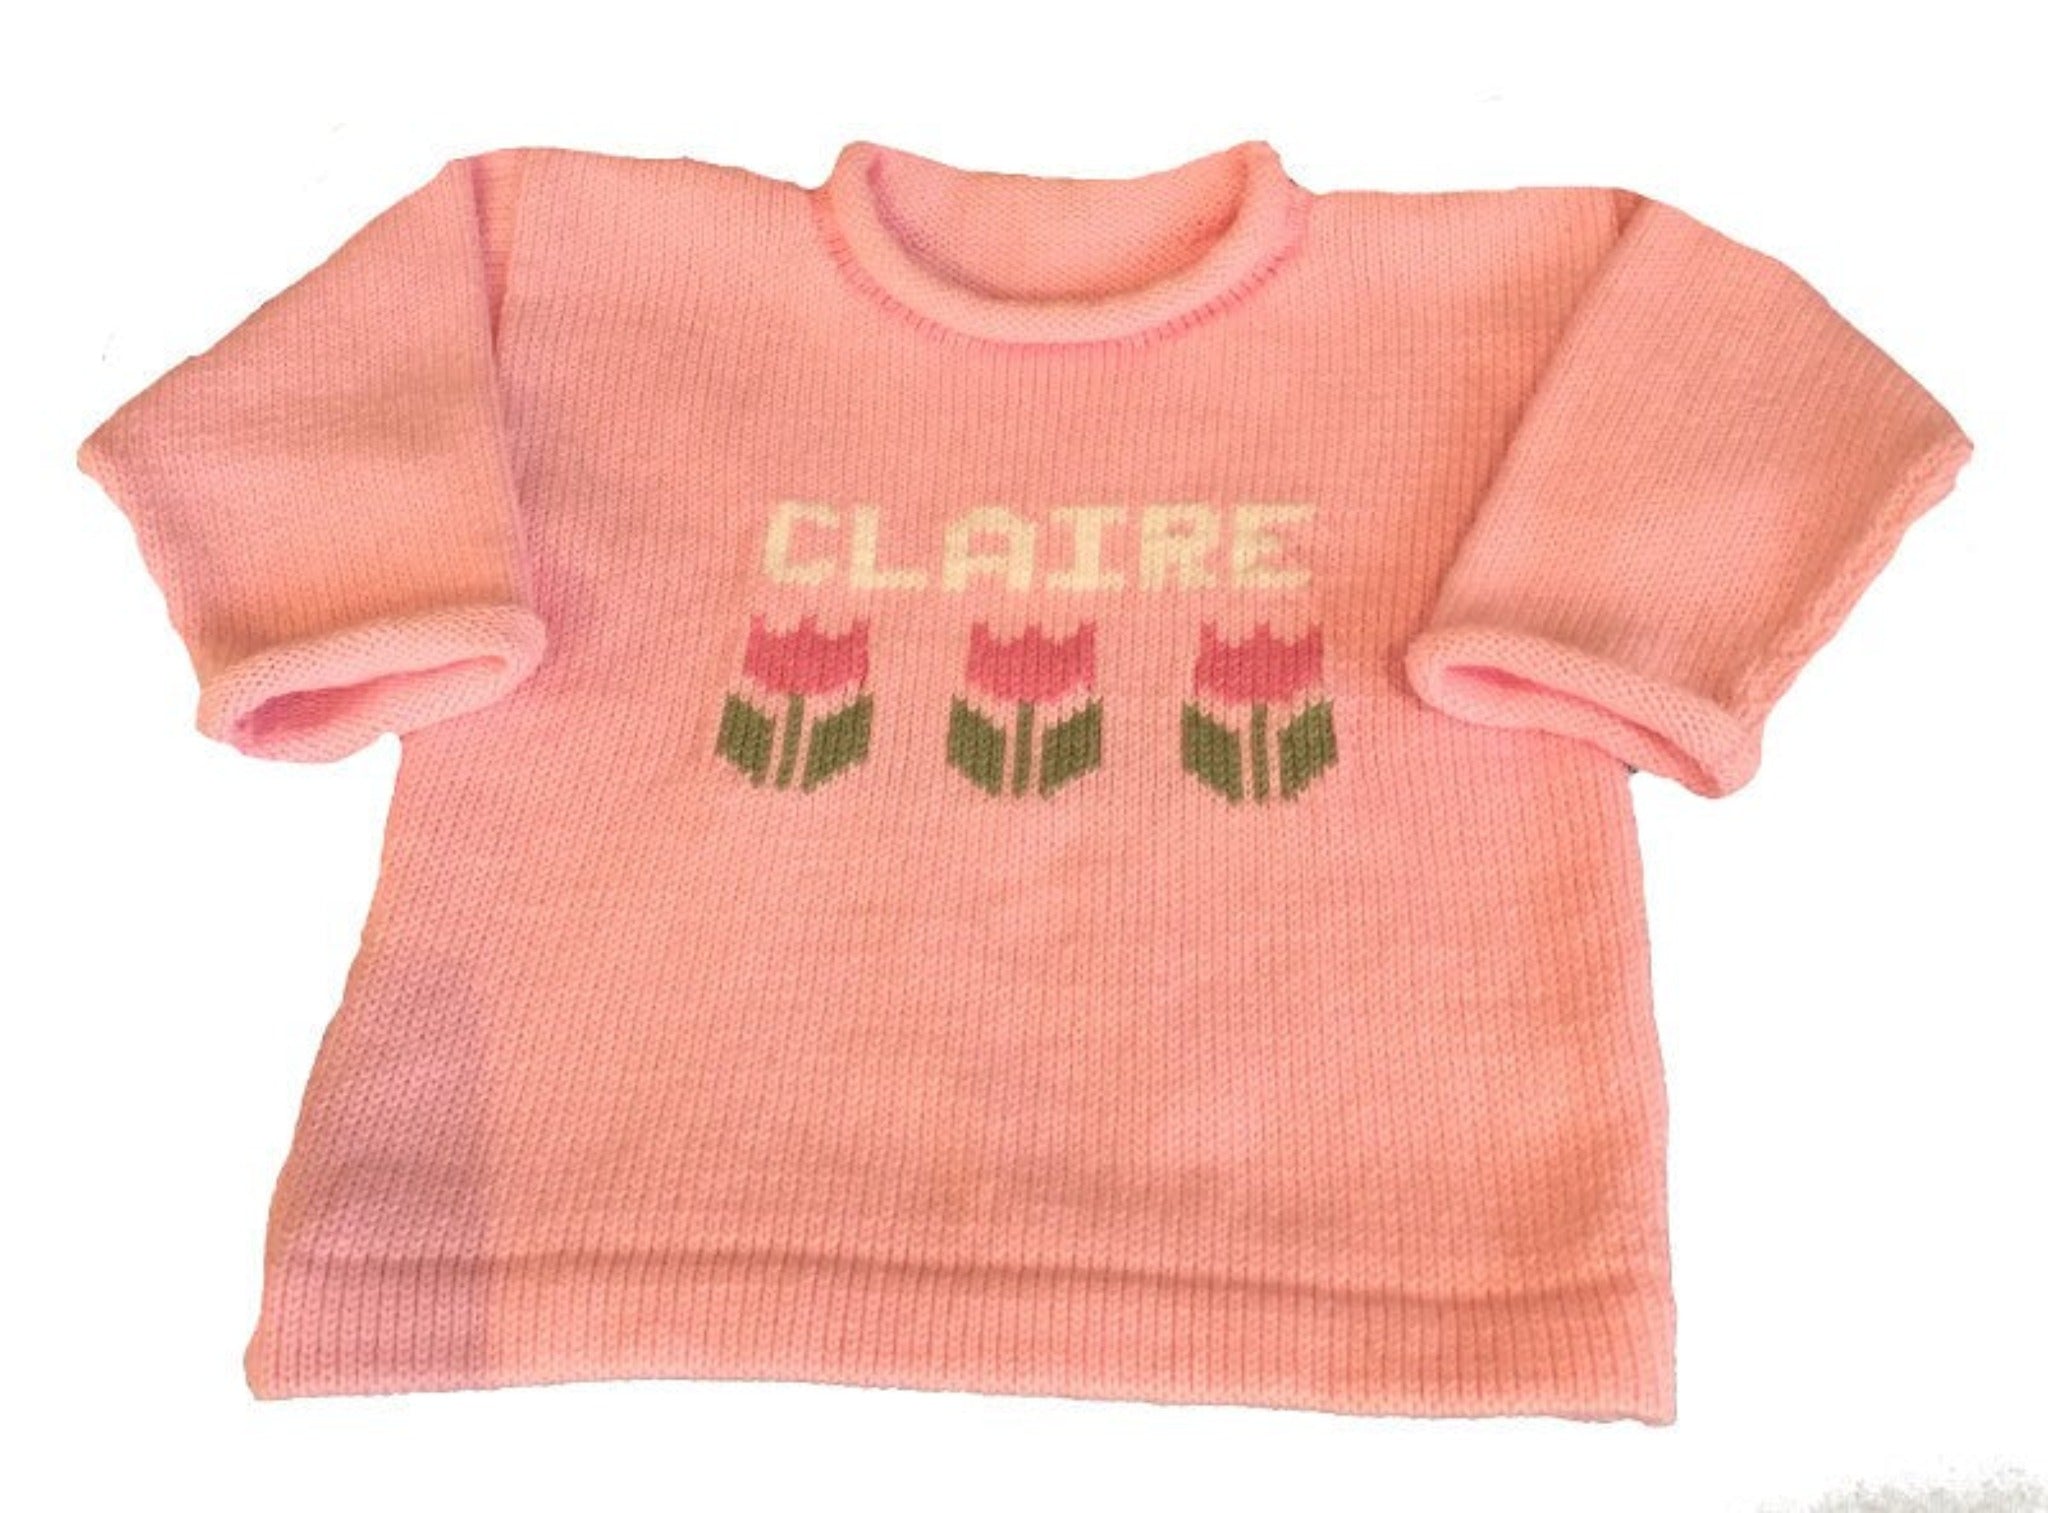 Baby Name Sweater with Tulip Motif - Custom Knits for Baby